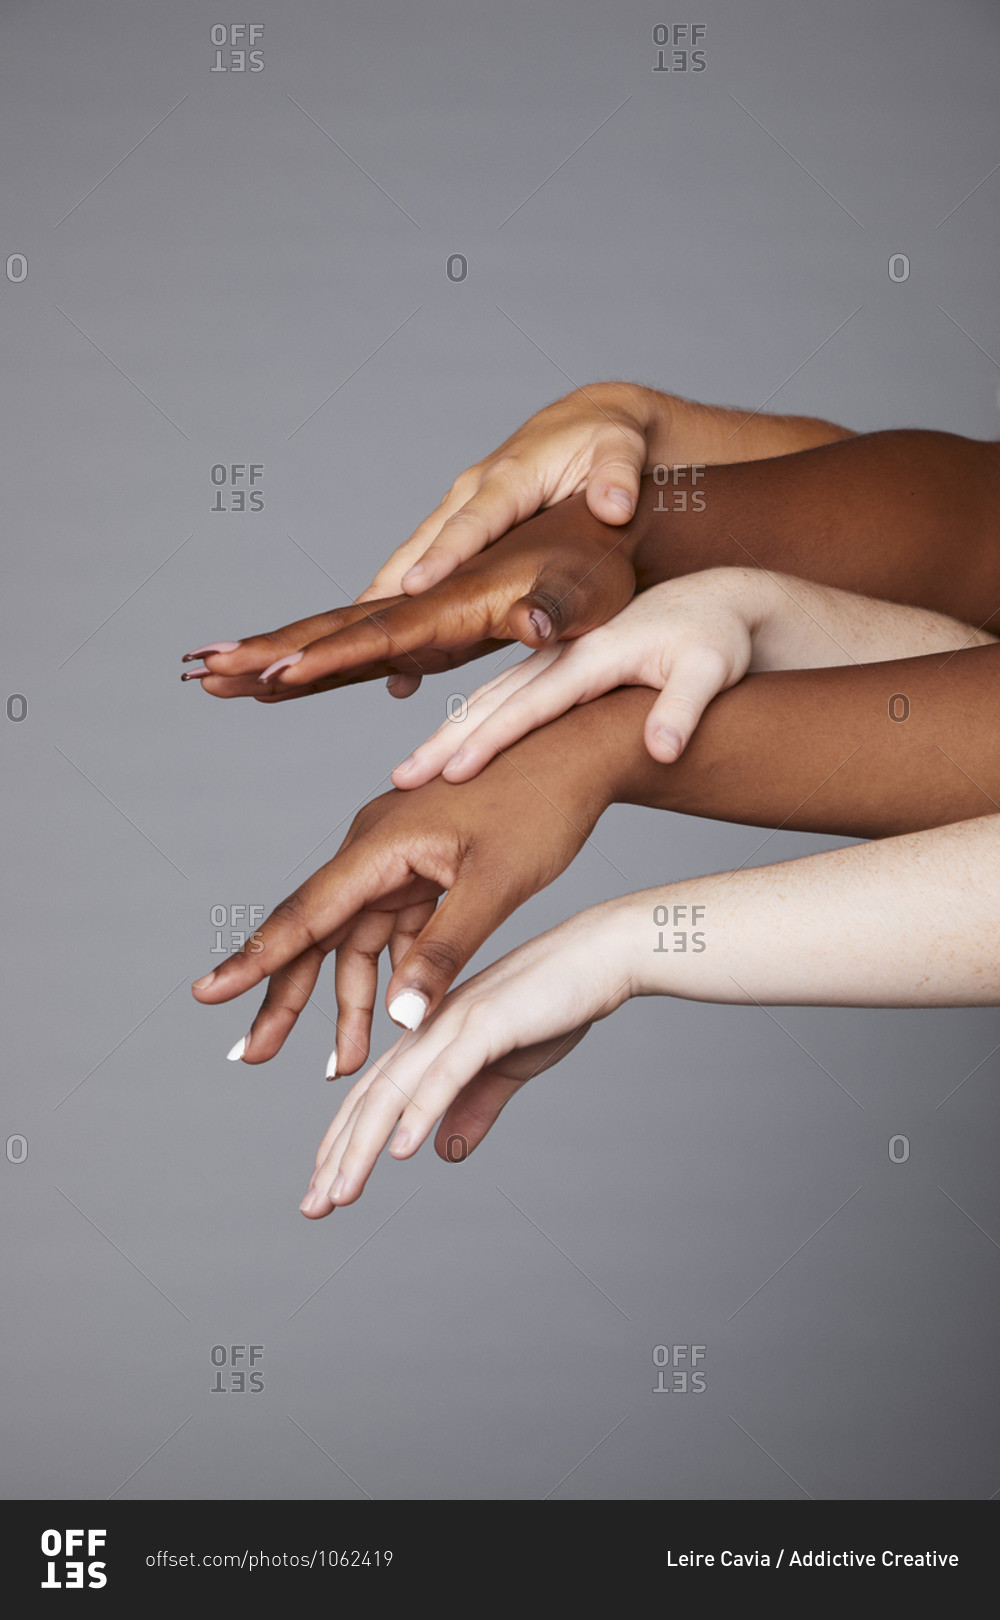 Group of unrecognizable crop multiracial females with different skin tone stacking hands delicately on gray background in studio demonstrating racial equality